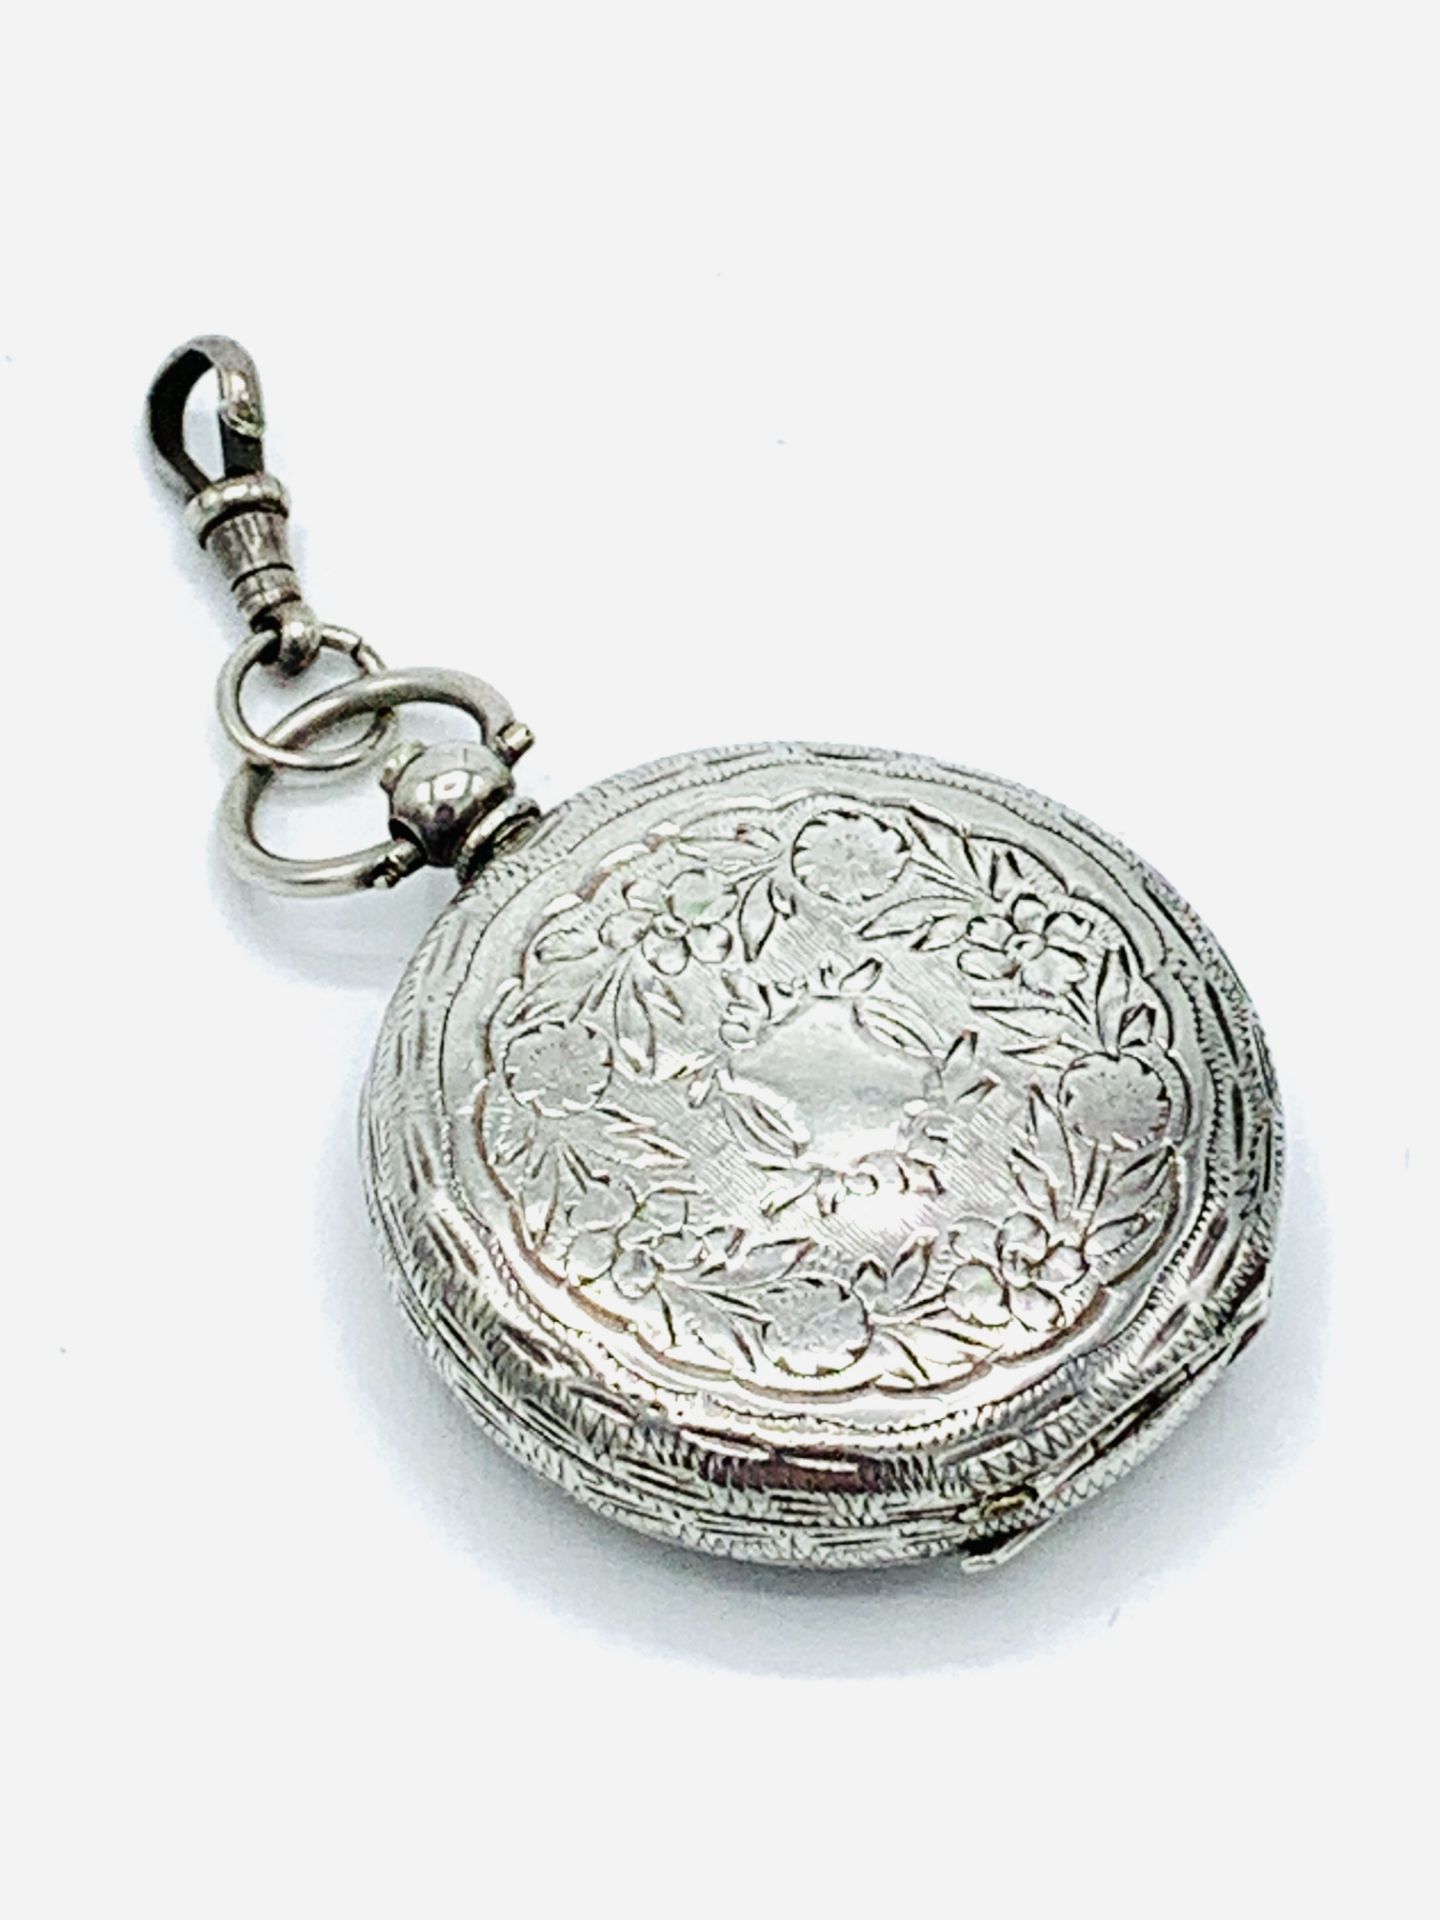 935 silver cased small pocket watch - Image 3 of 4